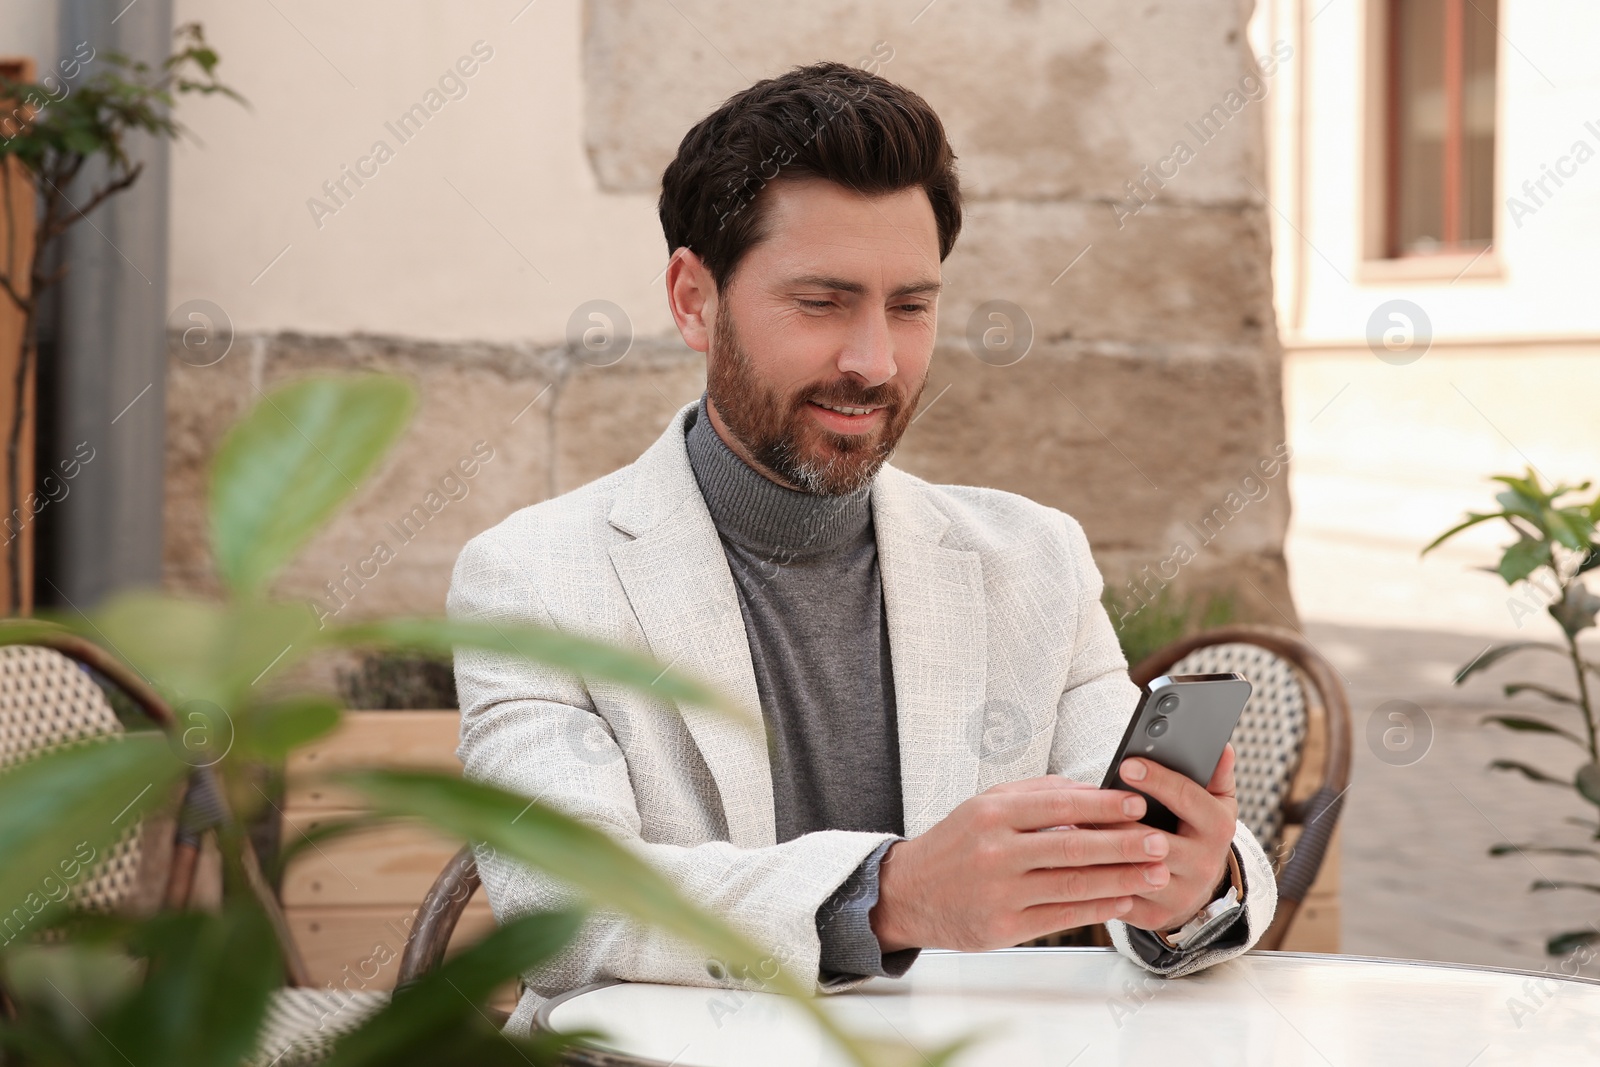 Photo of Handsome man sending message via smartphone at table outdoors